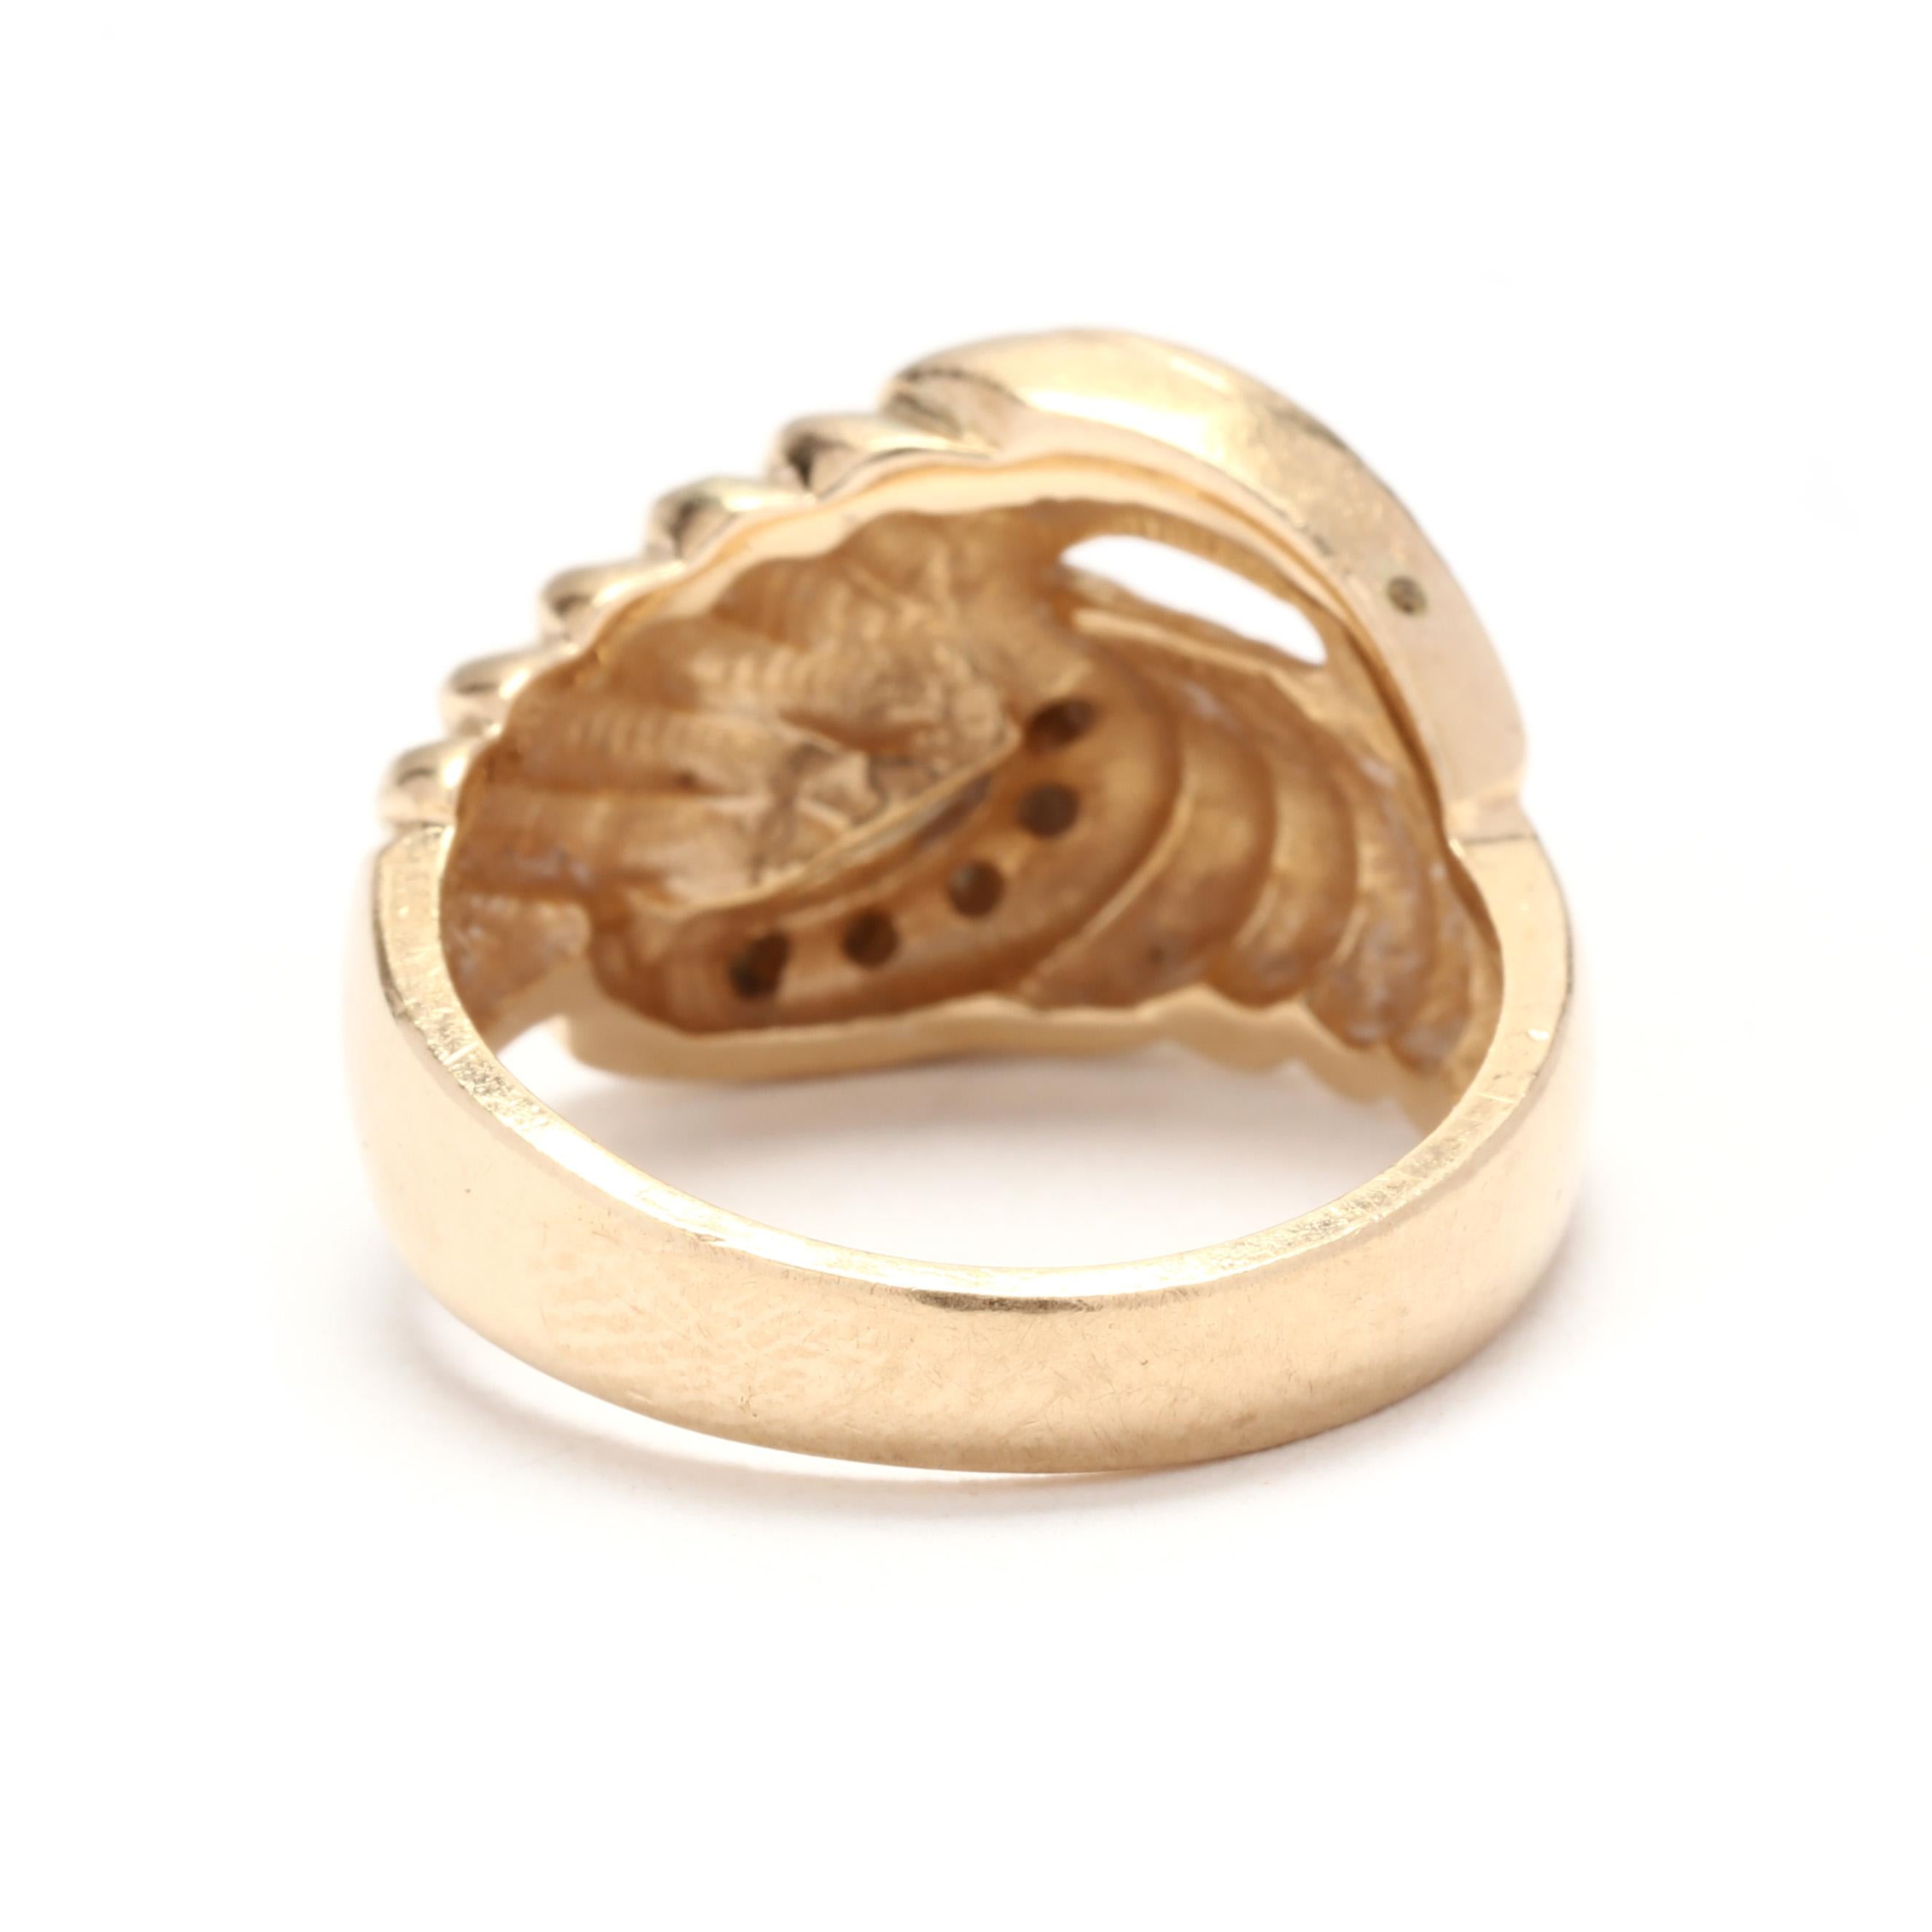 Brilliant Cut Diamond Knot Cocktail Ring, 14KT Yellow Gold, Ring, Ridged Knot Ring